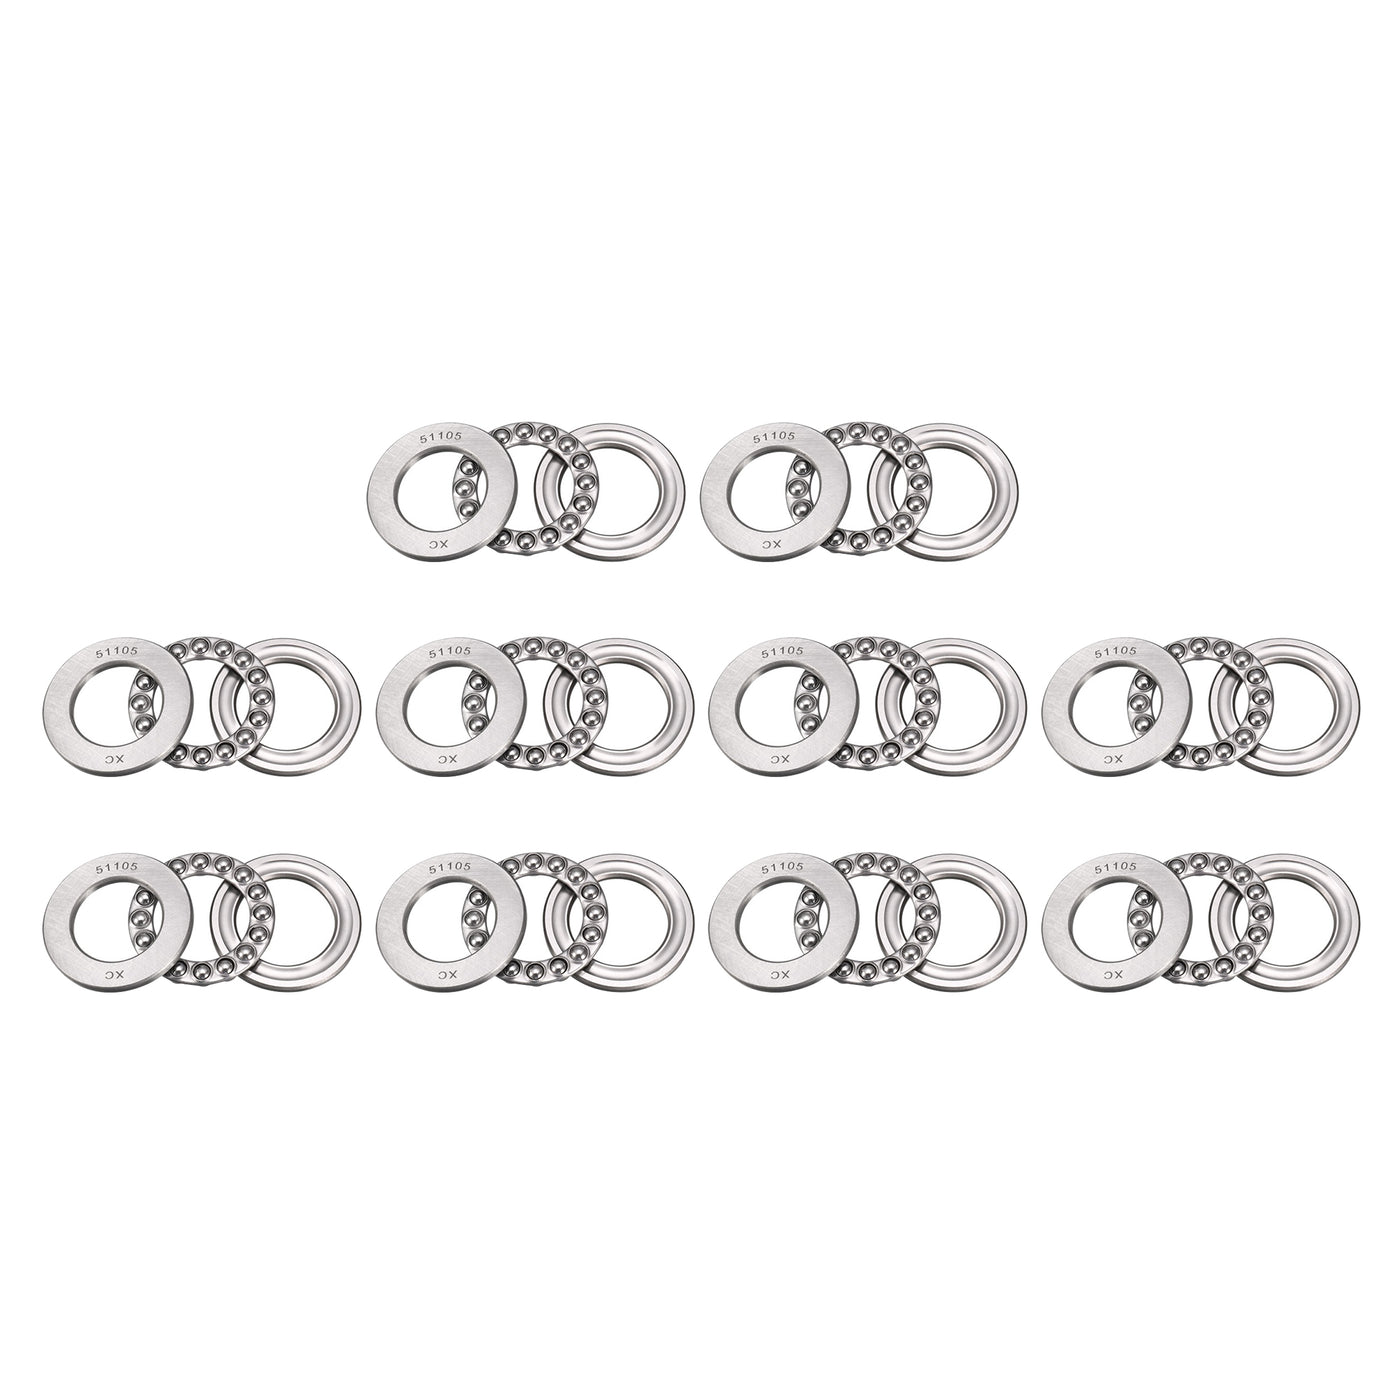 uxcell Uxcell 51105 Miniature Thrust Ball Bearing 25x42x11mm Chrome Steel with Washer 10pcs